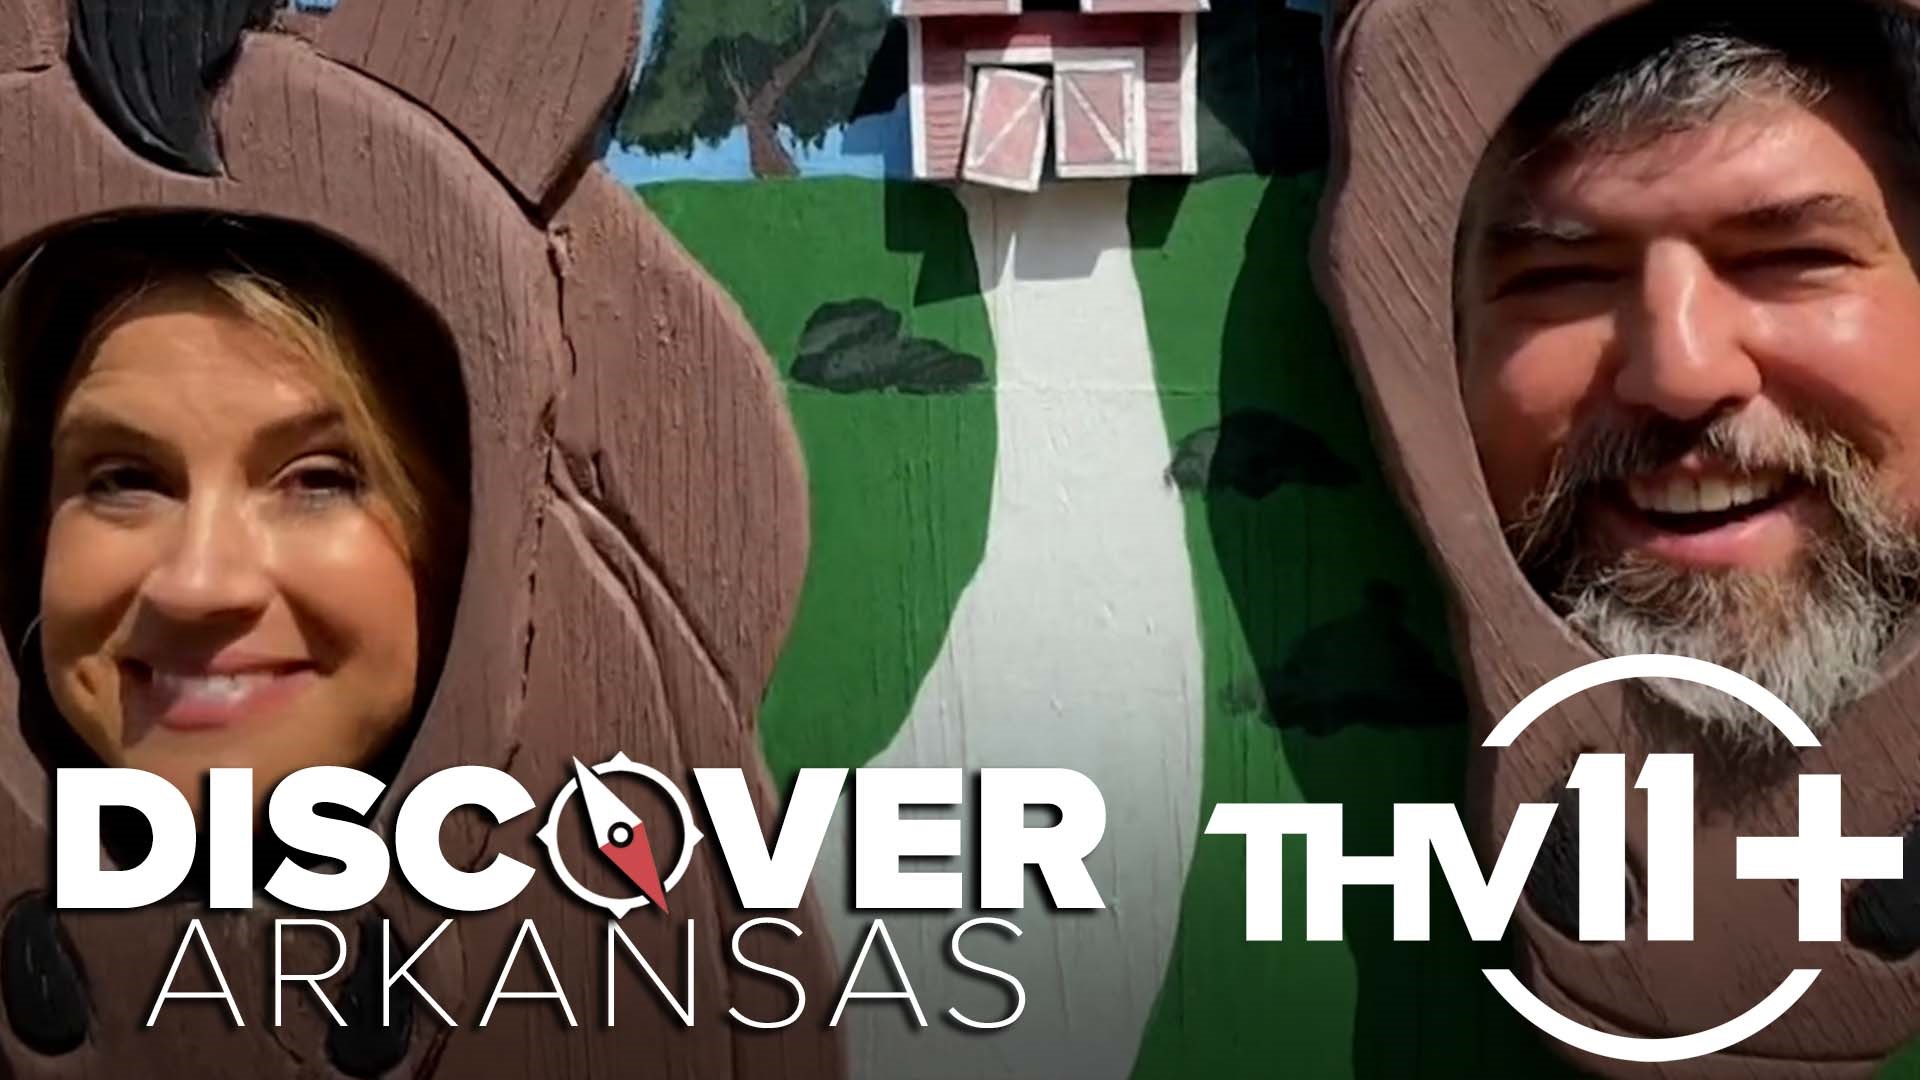 In this episode of Discover Arkansas, Ashley King and guests take us to the best state parks in Arkansas.